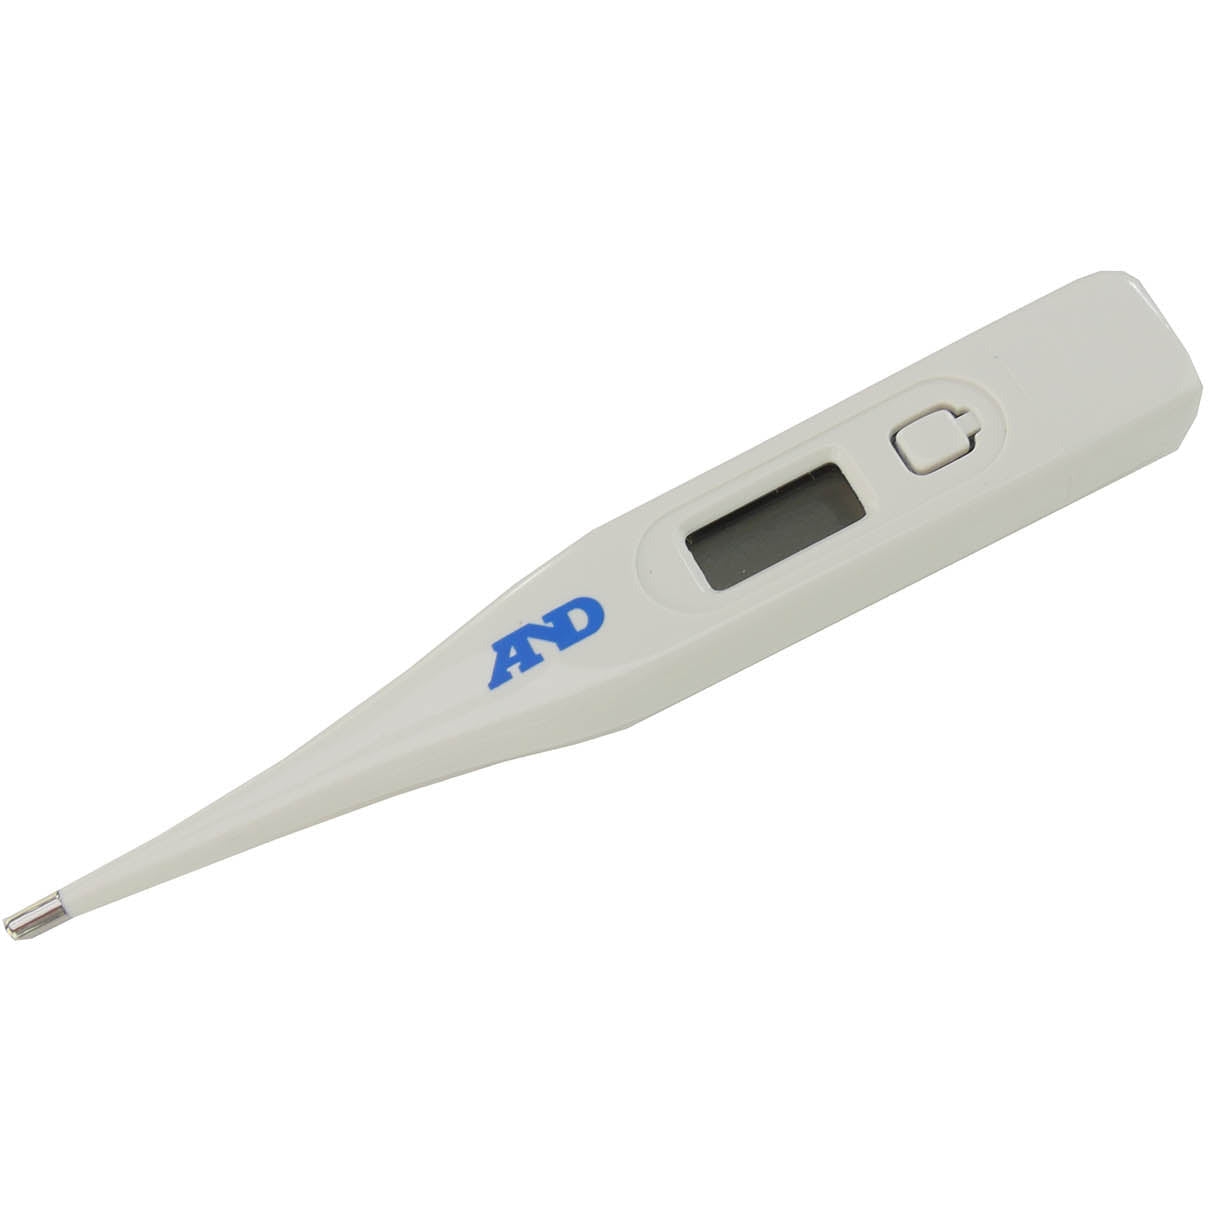 A & D Digital Thermometer